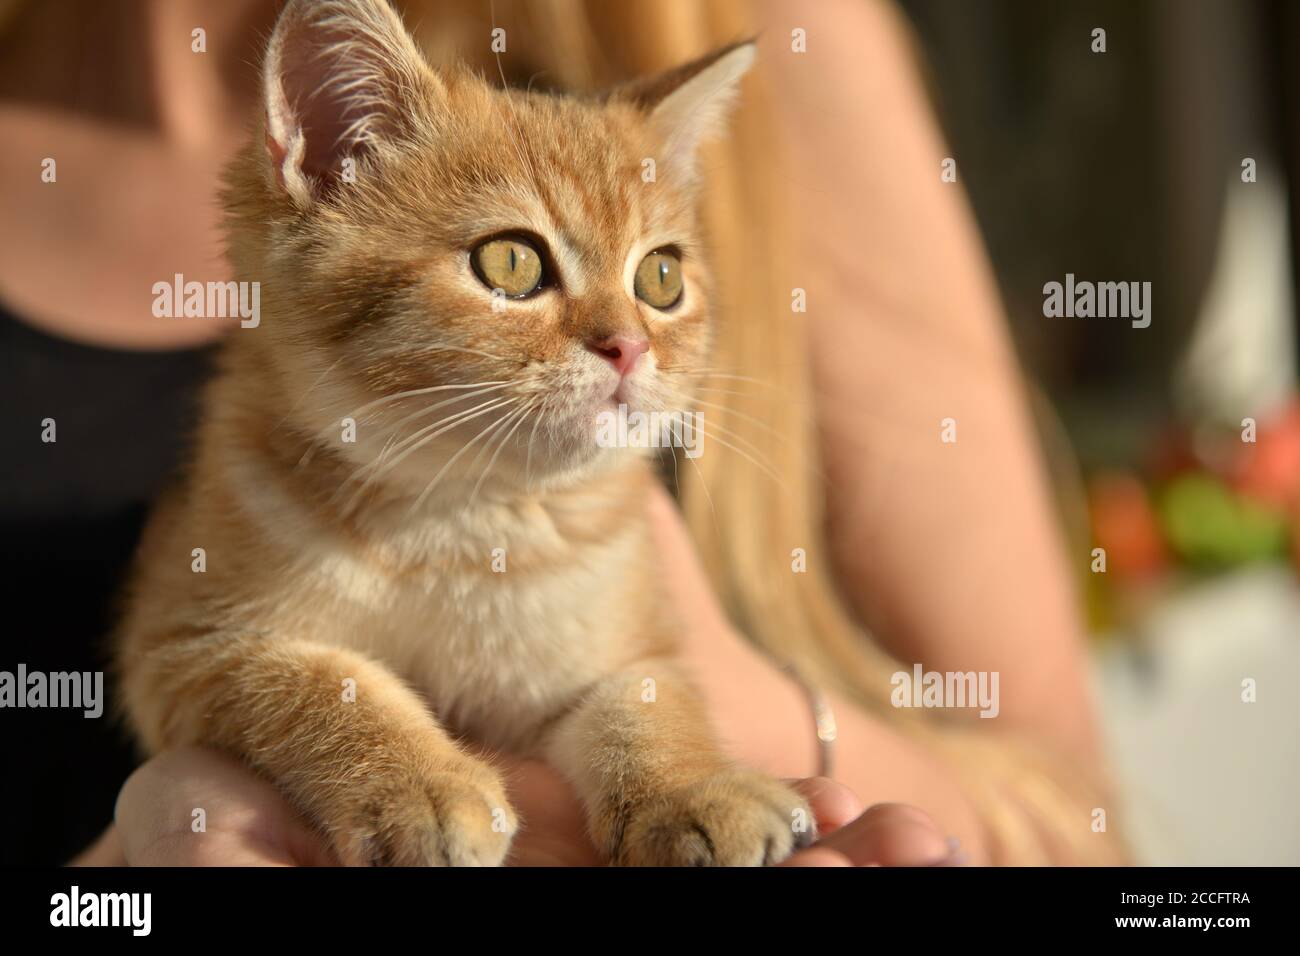 Little cute Scottish domestic kitten in girls hand. Cat and child at home. Kitten. Cute red kitten. Animals or pets concept. Day in the Life Series. Stock Photo